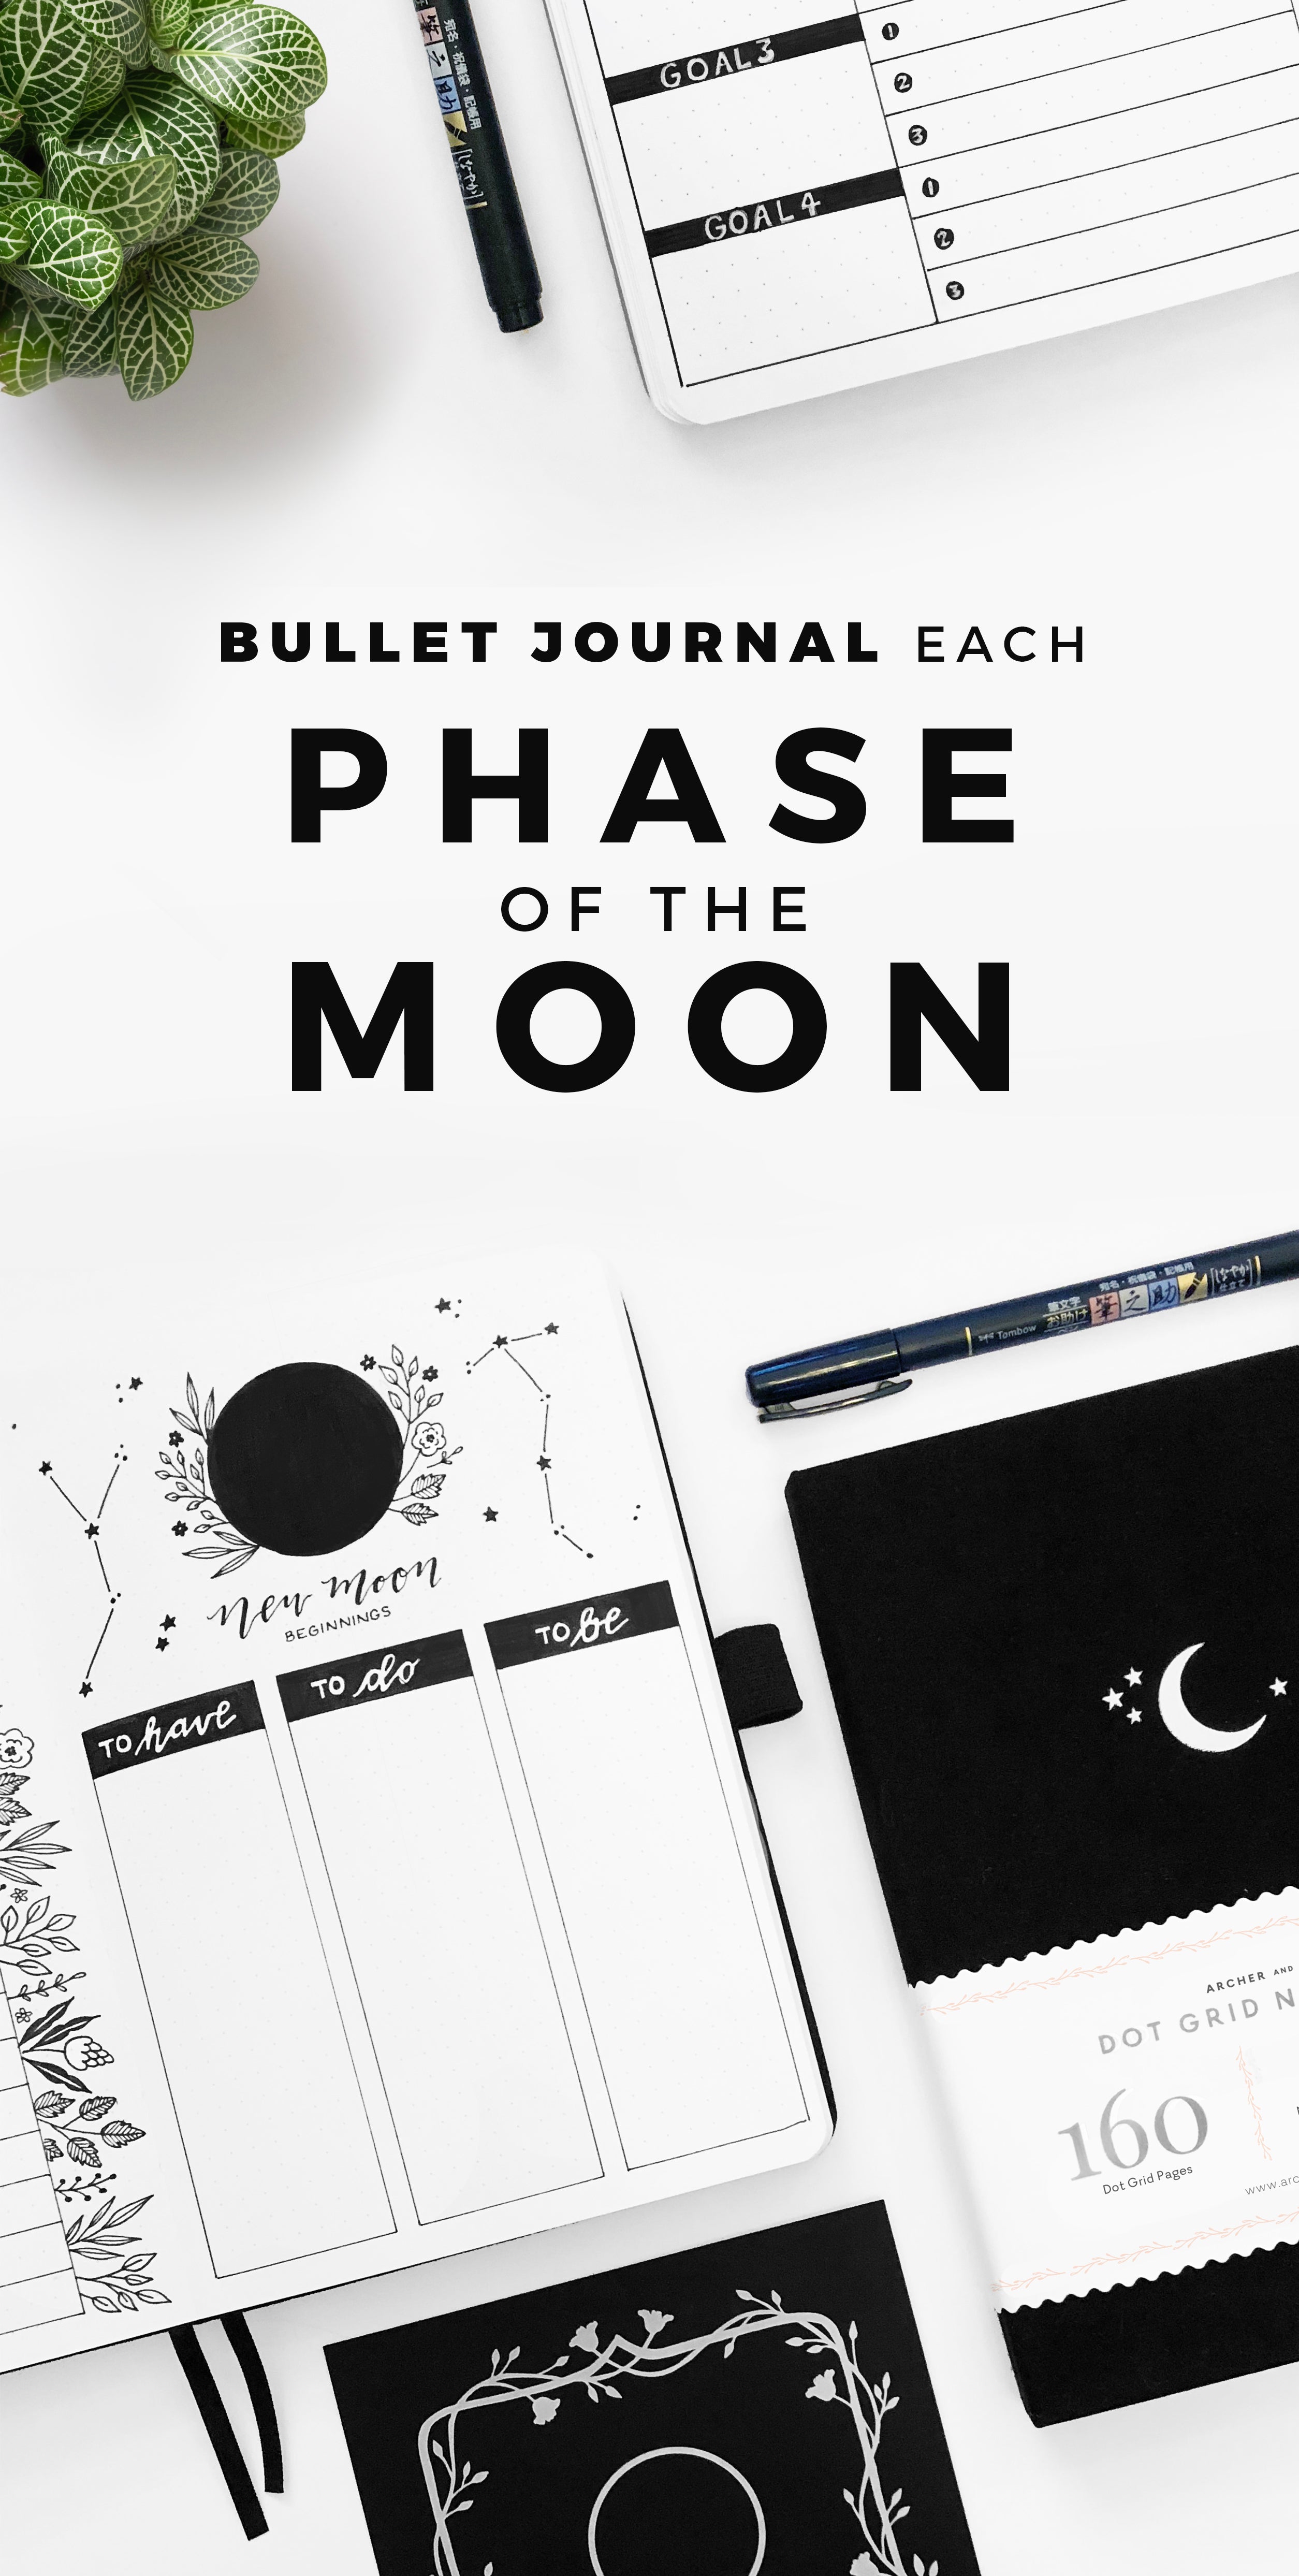 Bullet Journal each phase of the moon